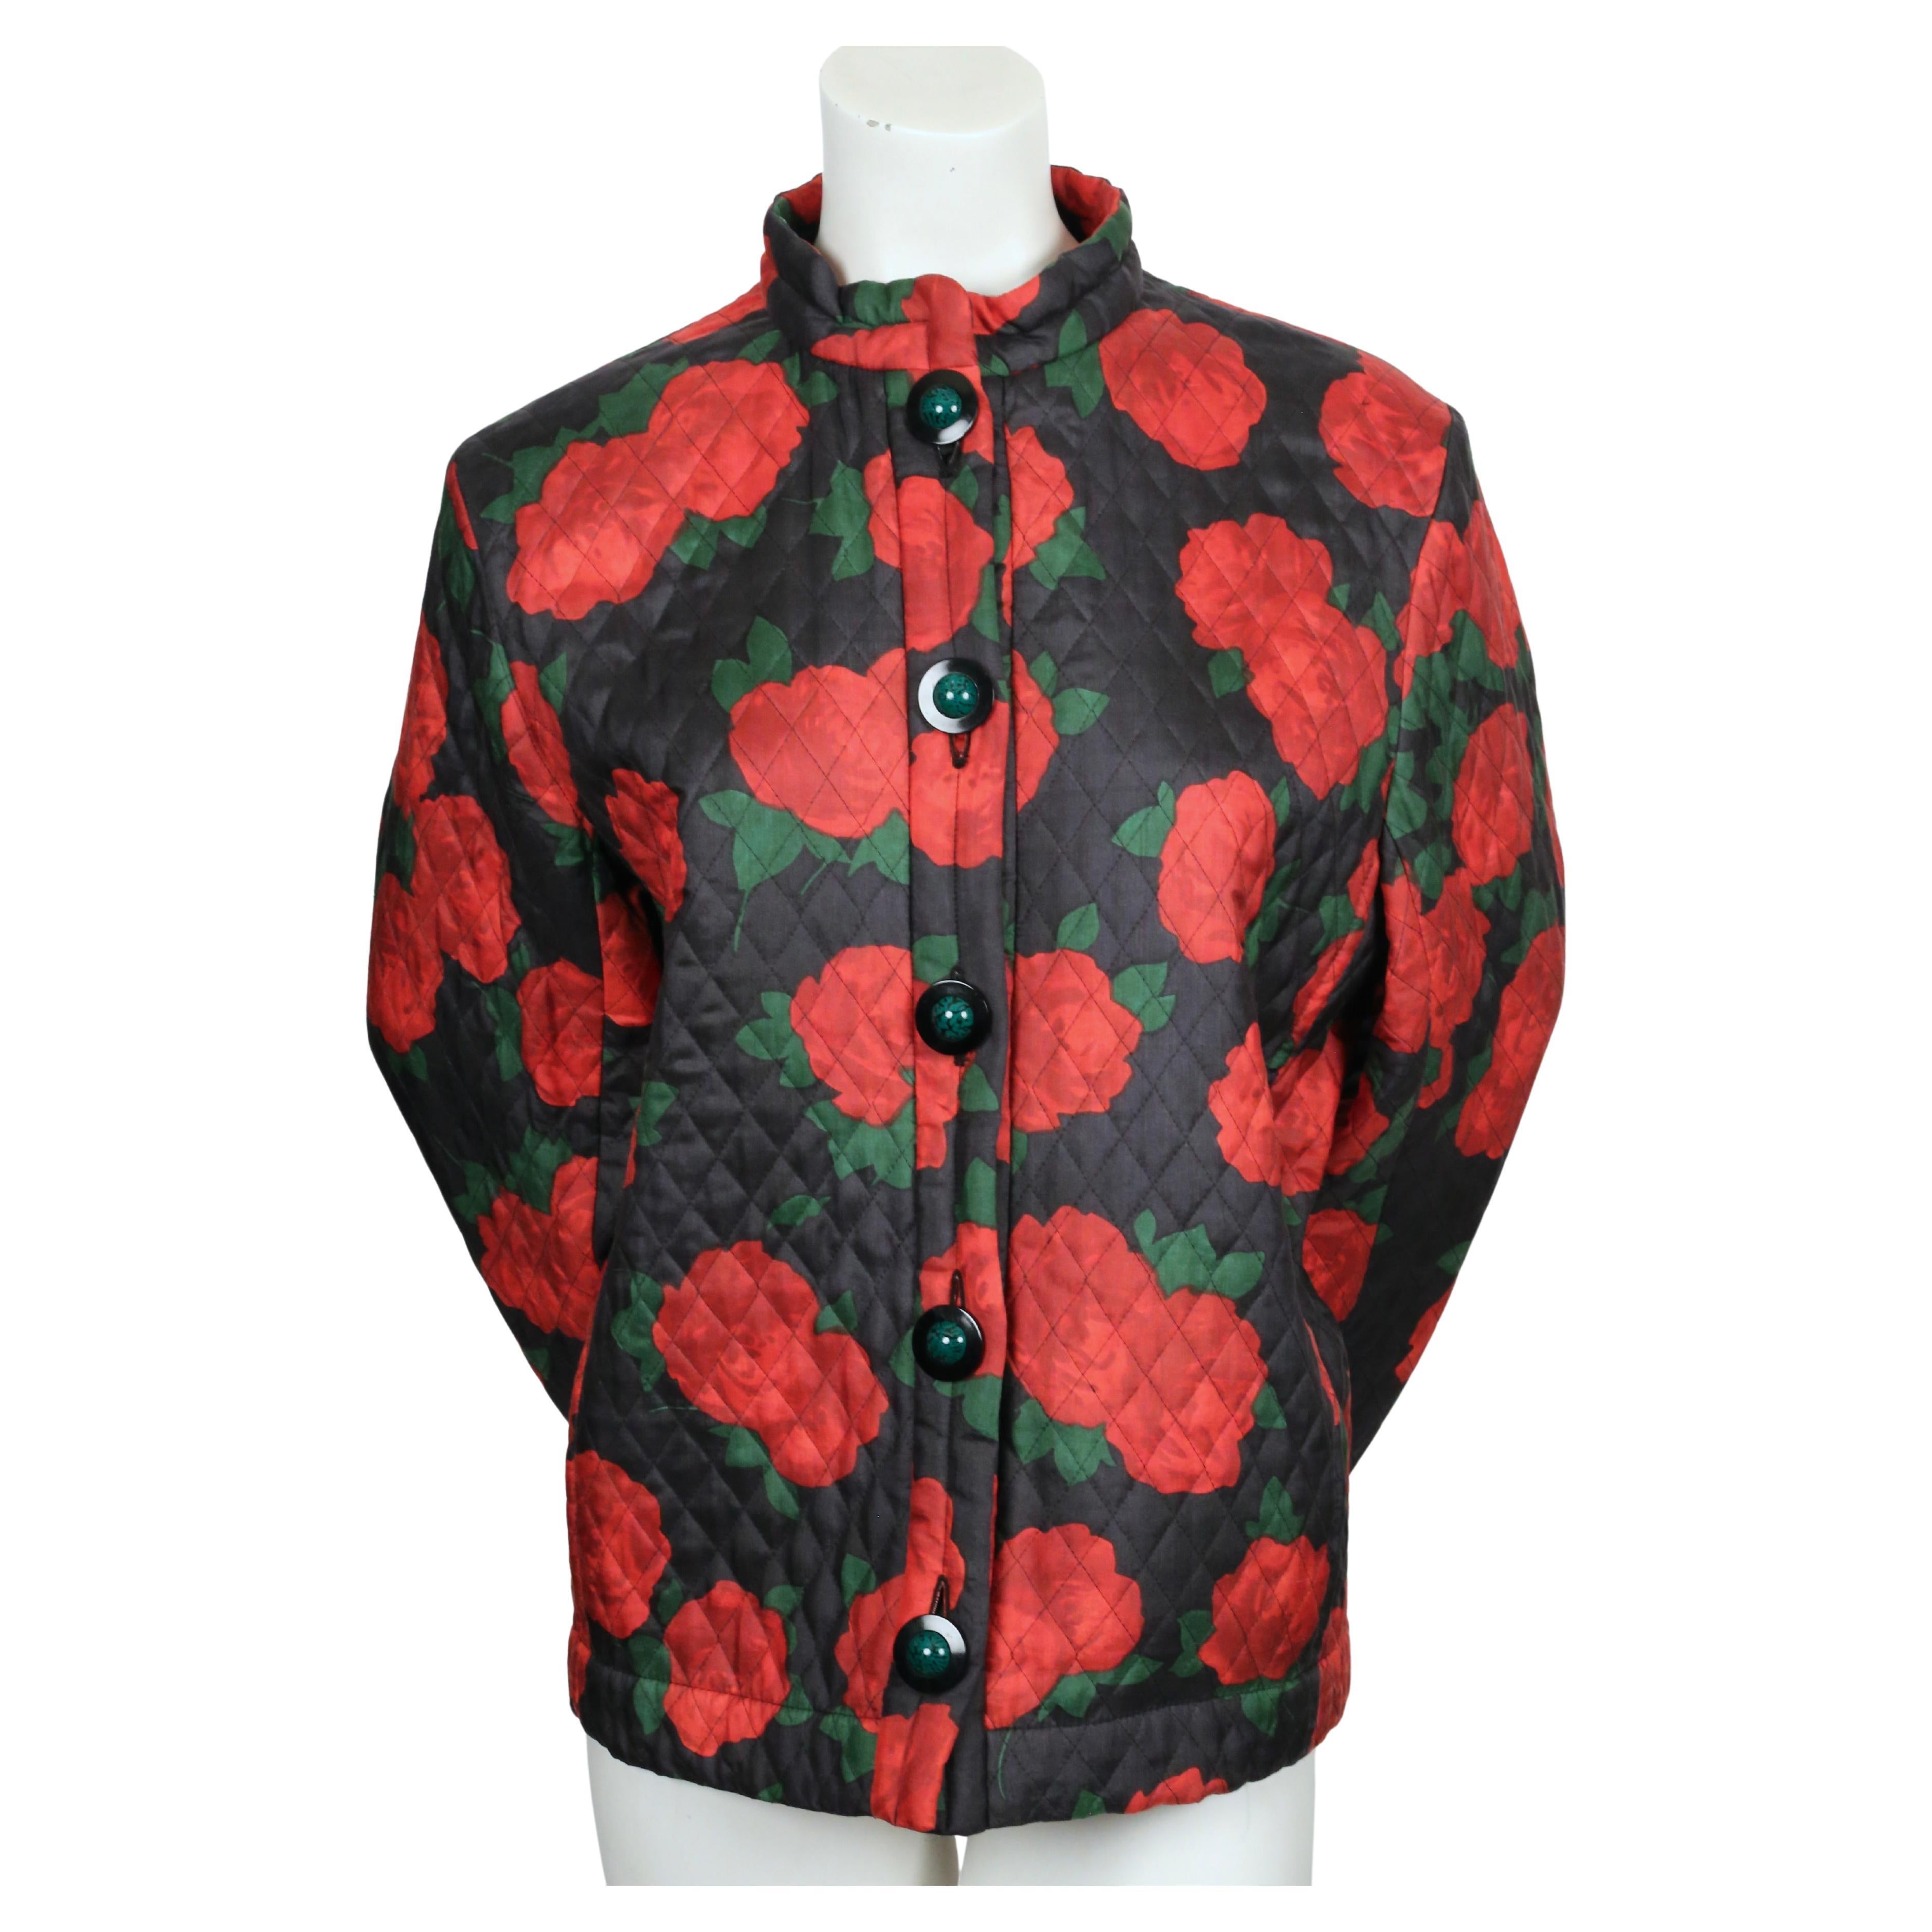 Vibrant, rose-printed silk jacket with quilting designed by Yves Saint Laurent dating to Fall of 1994 exactly as seen on the runway. The jacket features a boxy cut with a stand-up collar, hidden side pockets and closes with amazing black and green